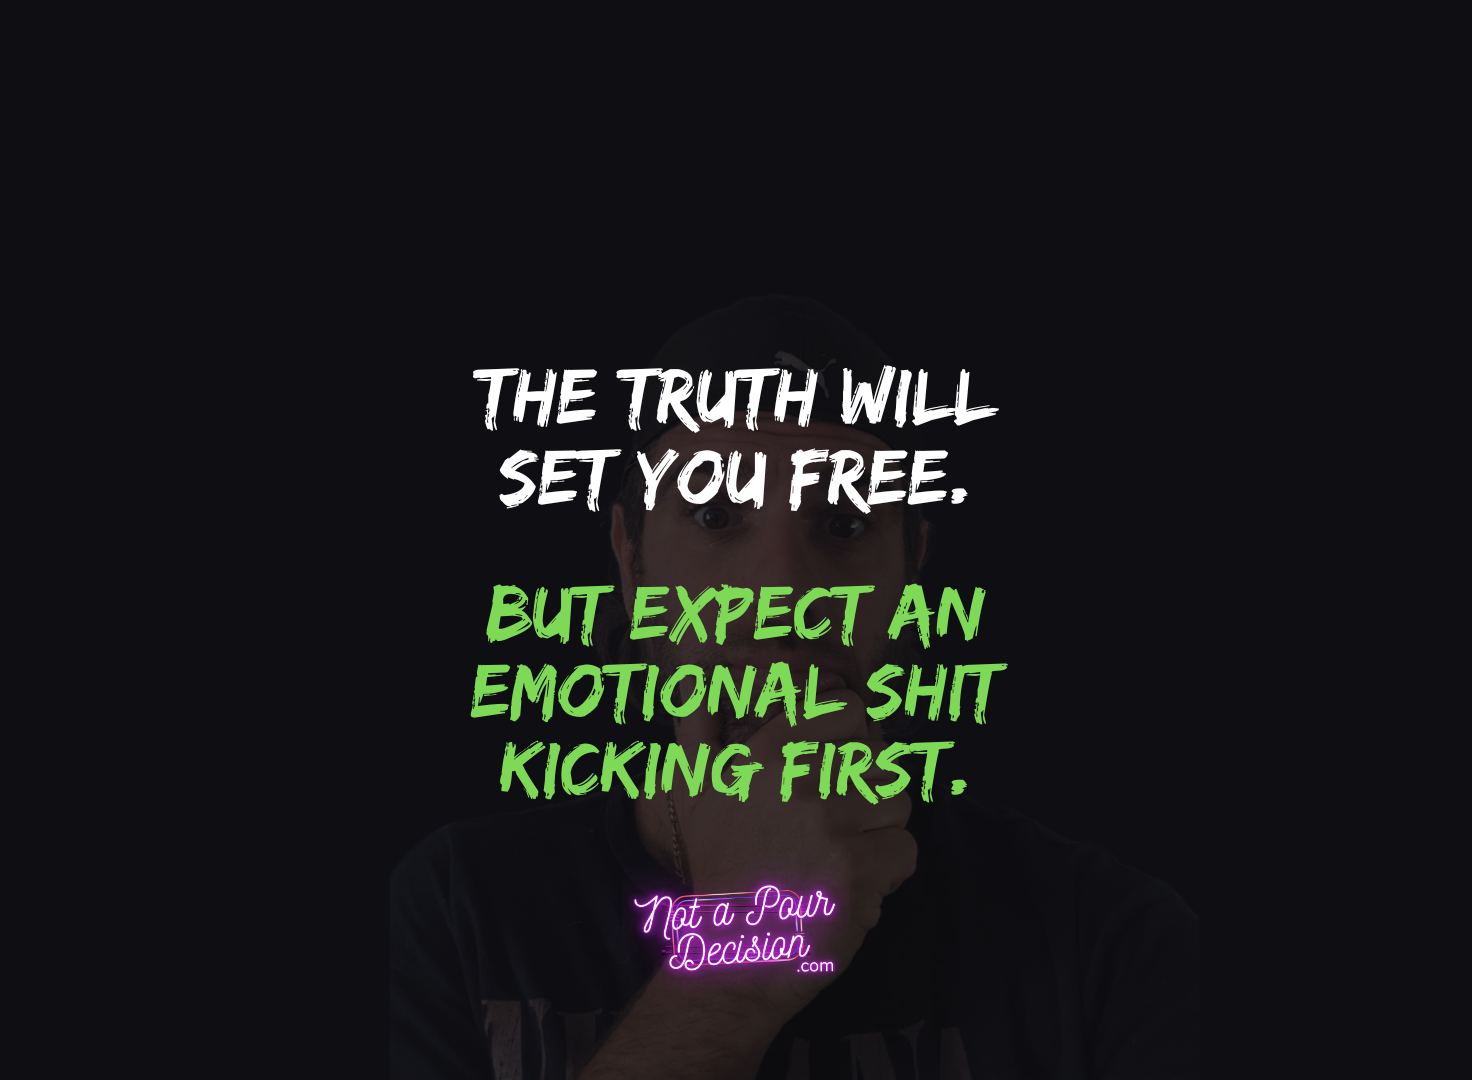 The truth will set you free...